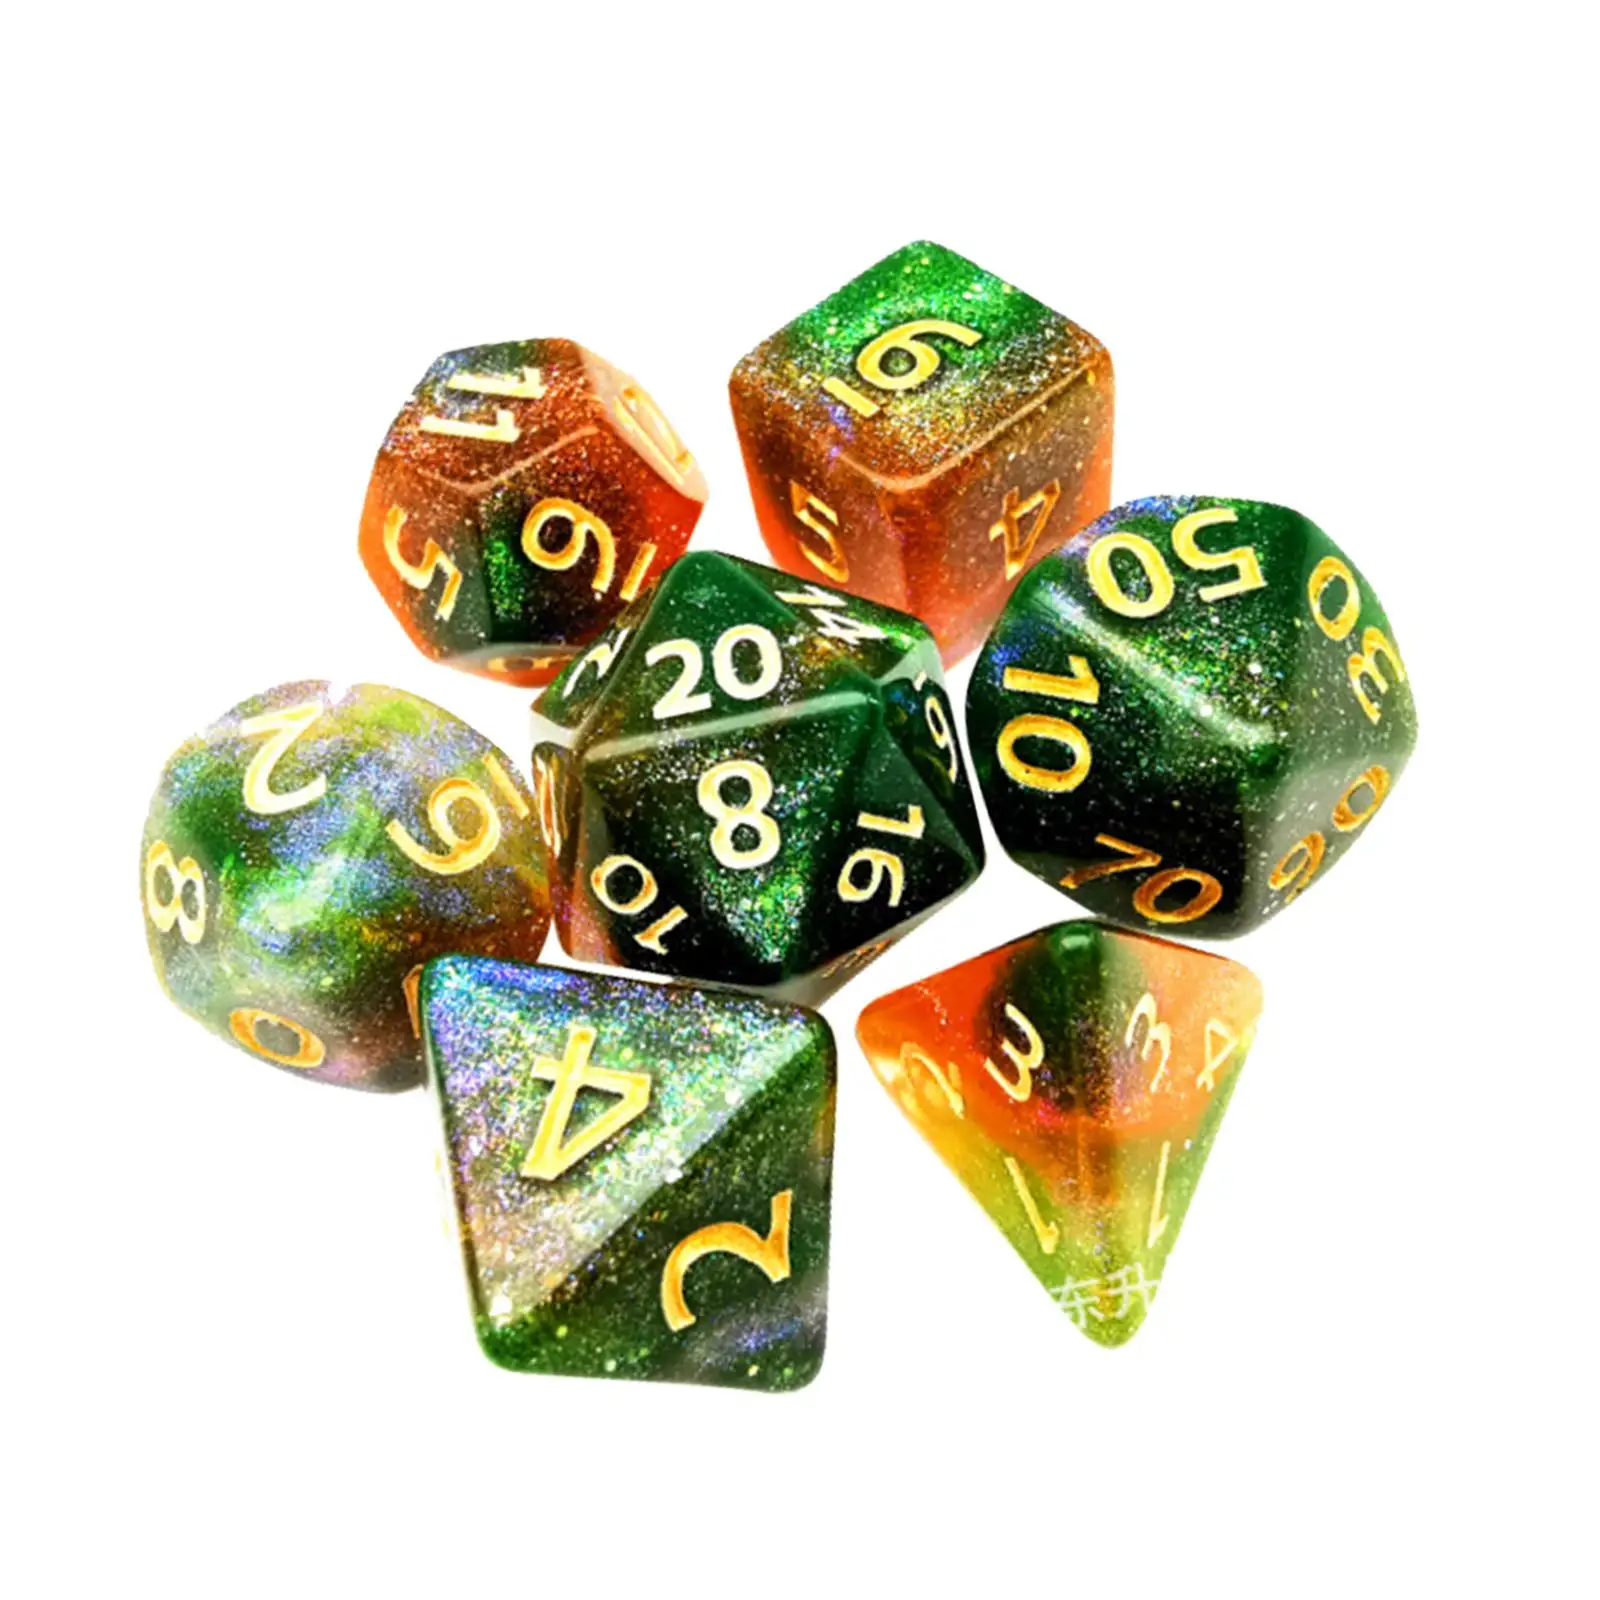 7 Die Polyhedral Dices Set D8 D10 D12 D20 Party Toys for MTG RPG Role Playing Table Games Math Teaching